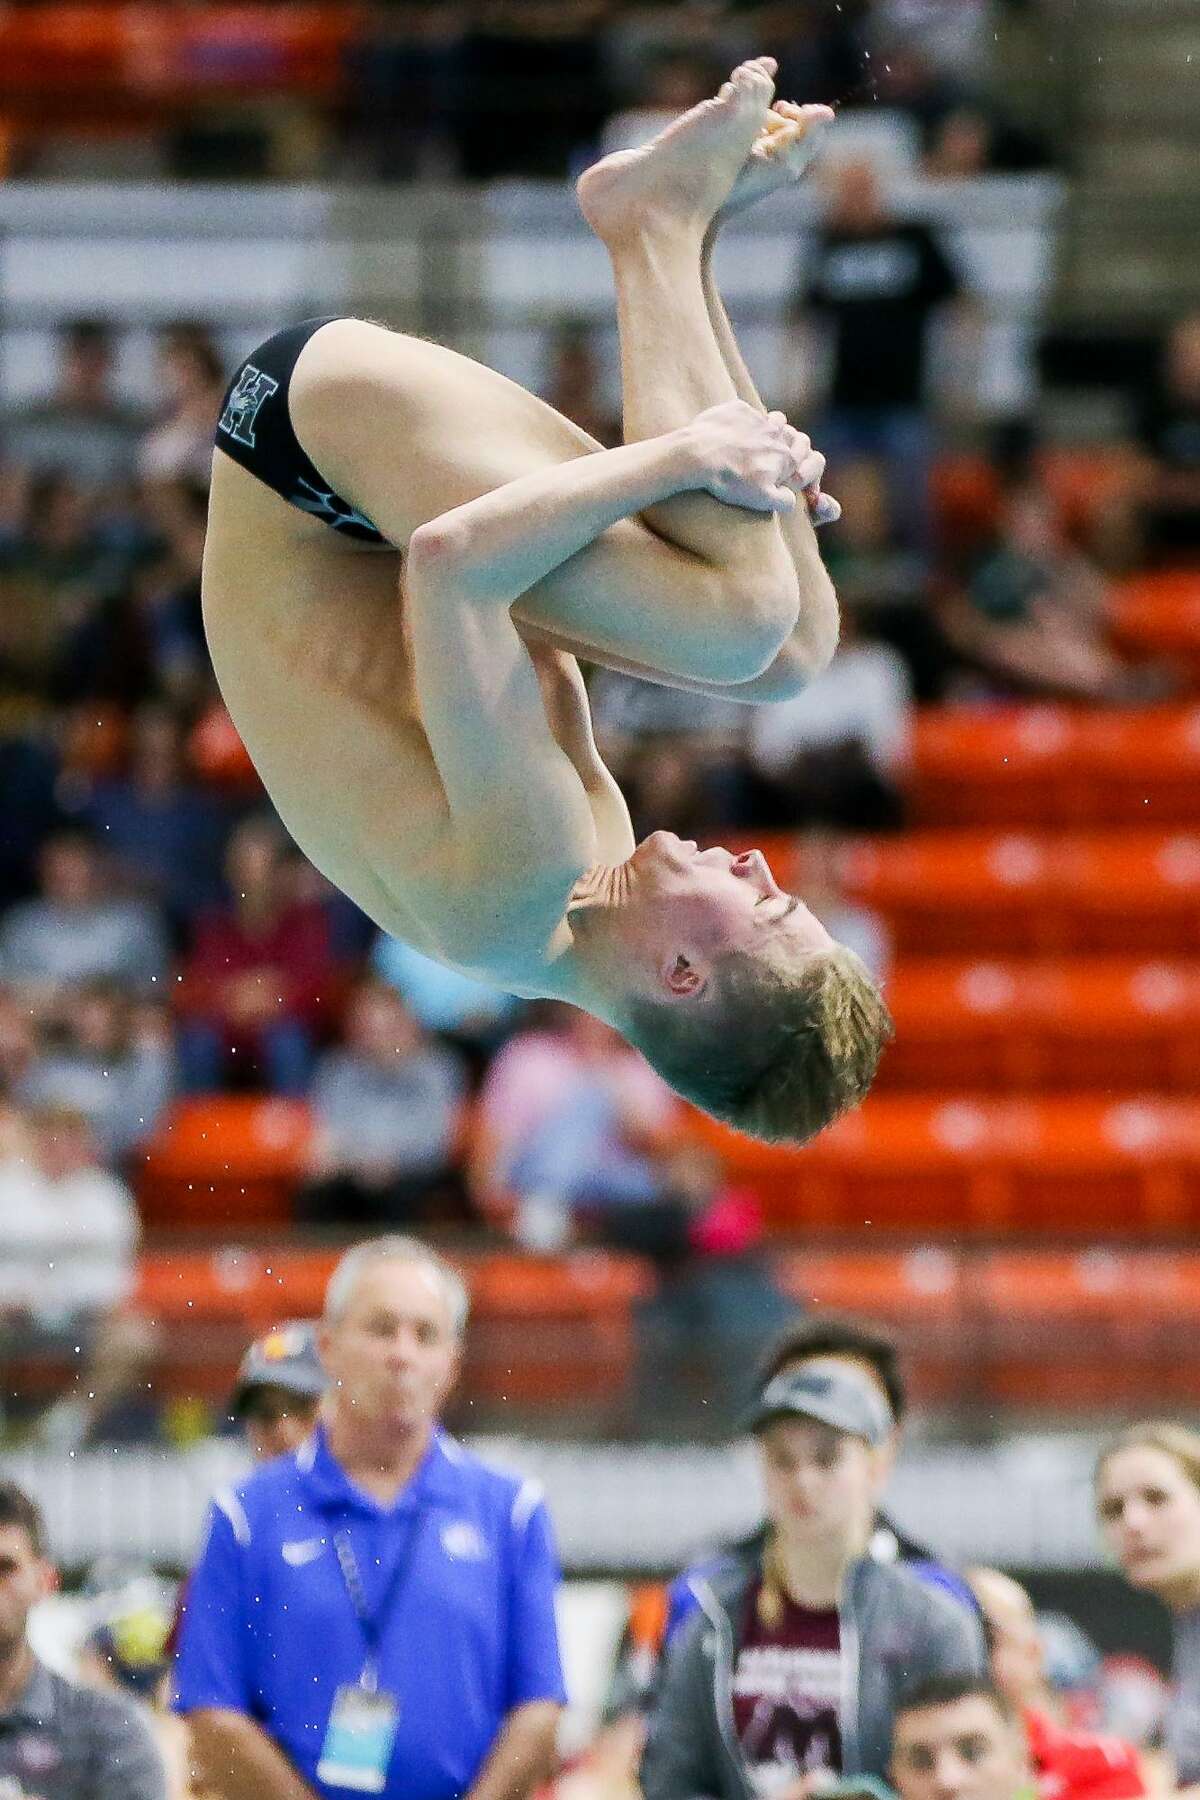 Harlan's Nicholas McCann competes in the 5A boys 1-meter diving during the UIL Class 5A and Class 6A state championships at the University of Texas' Jamail Center in Austin on Saturday, Feb. 17, 2018. McCann finished sixth in the event with a score of 289.55 points. MARVIN PFEIFFER/mpfeiffer@express-news.net